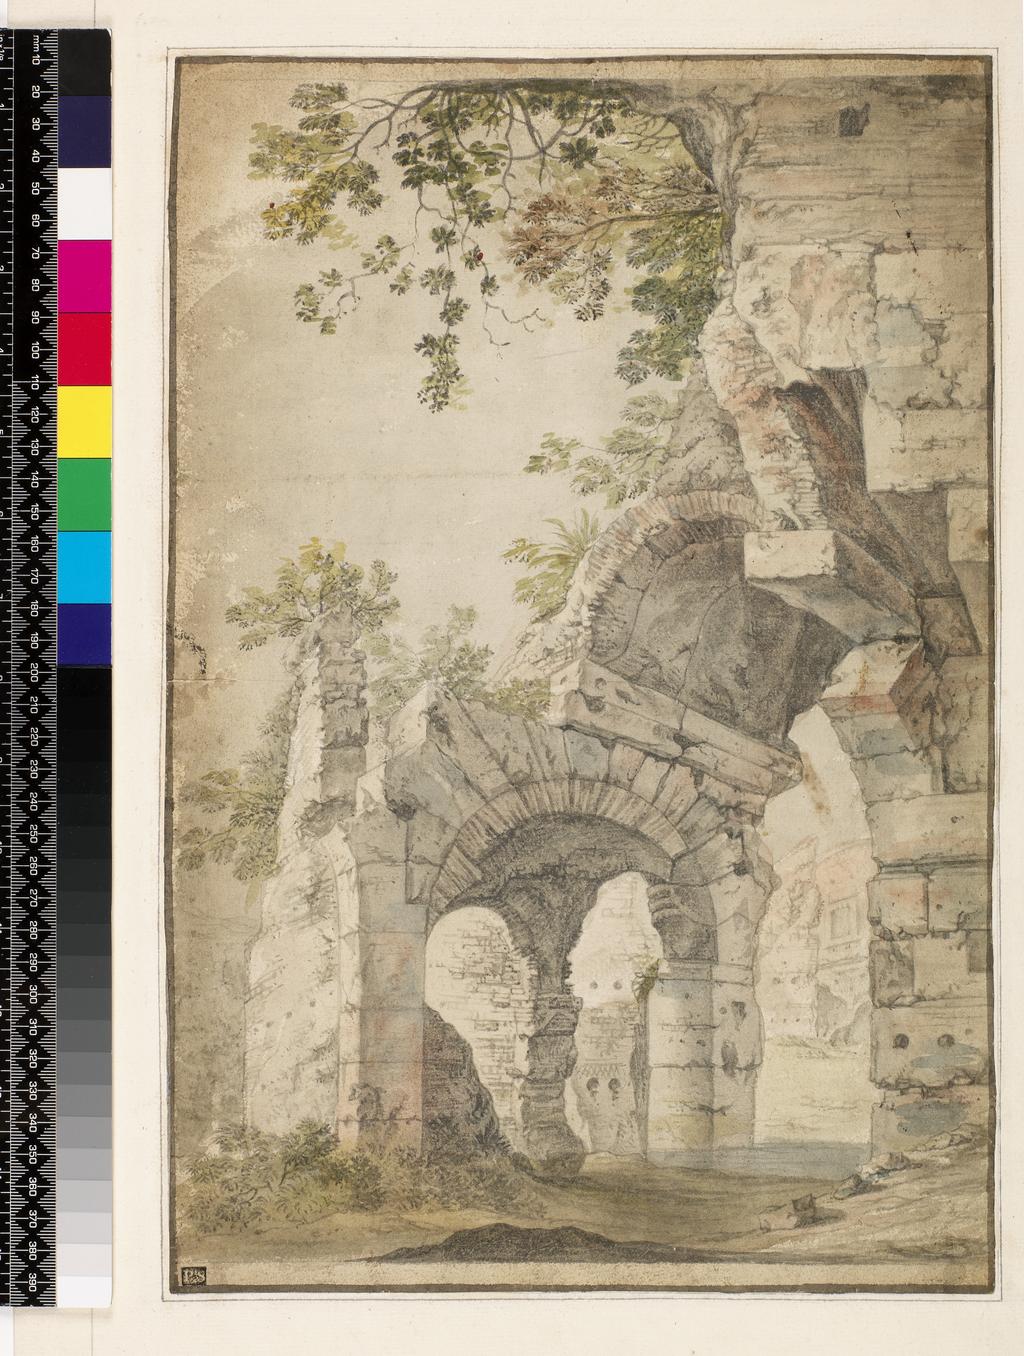 An image of Recto: The Ruins of the Colosseum. Verso: Study of trees. Worst, Jan, attributed to (Dutch, op.c.1645-1655). Recto: Black chalk and watercolour on paper. Verso: pen and brown ink. Height 385 mm, width 258 mm, early 17th century.